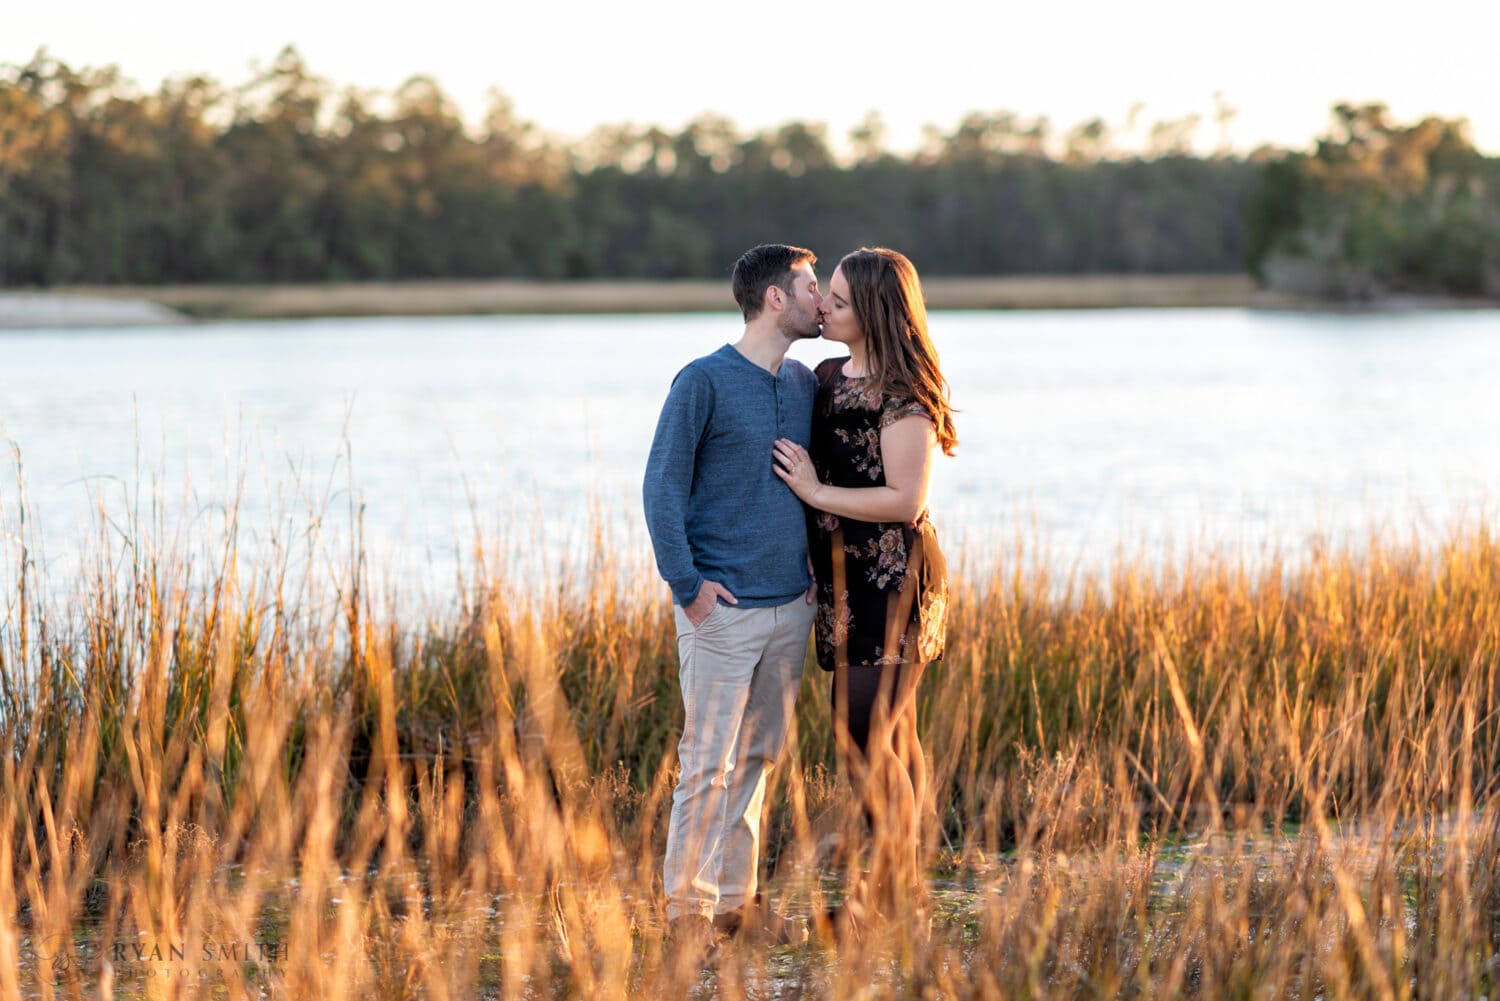 Beautiful sunset for engagement pictures today - Vereen Memorial Gardens